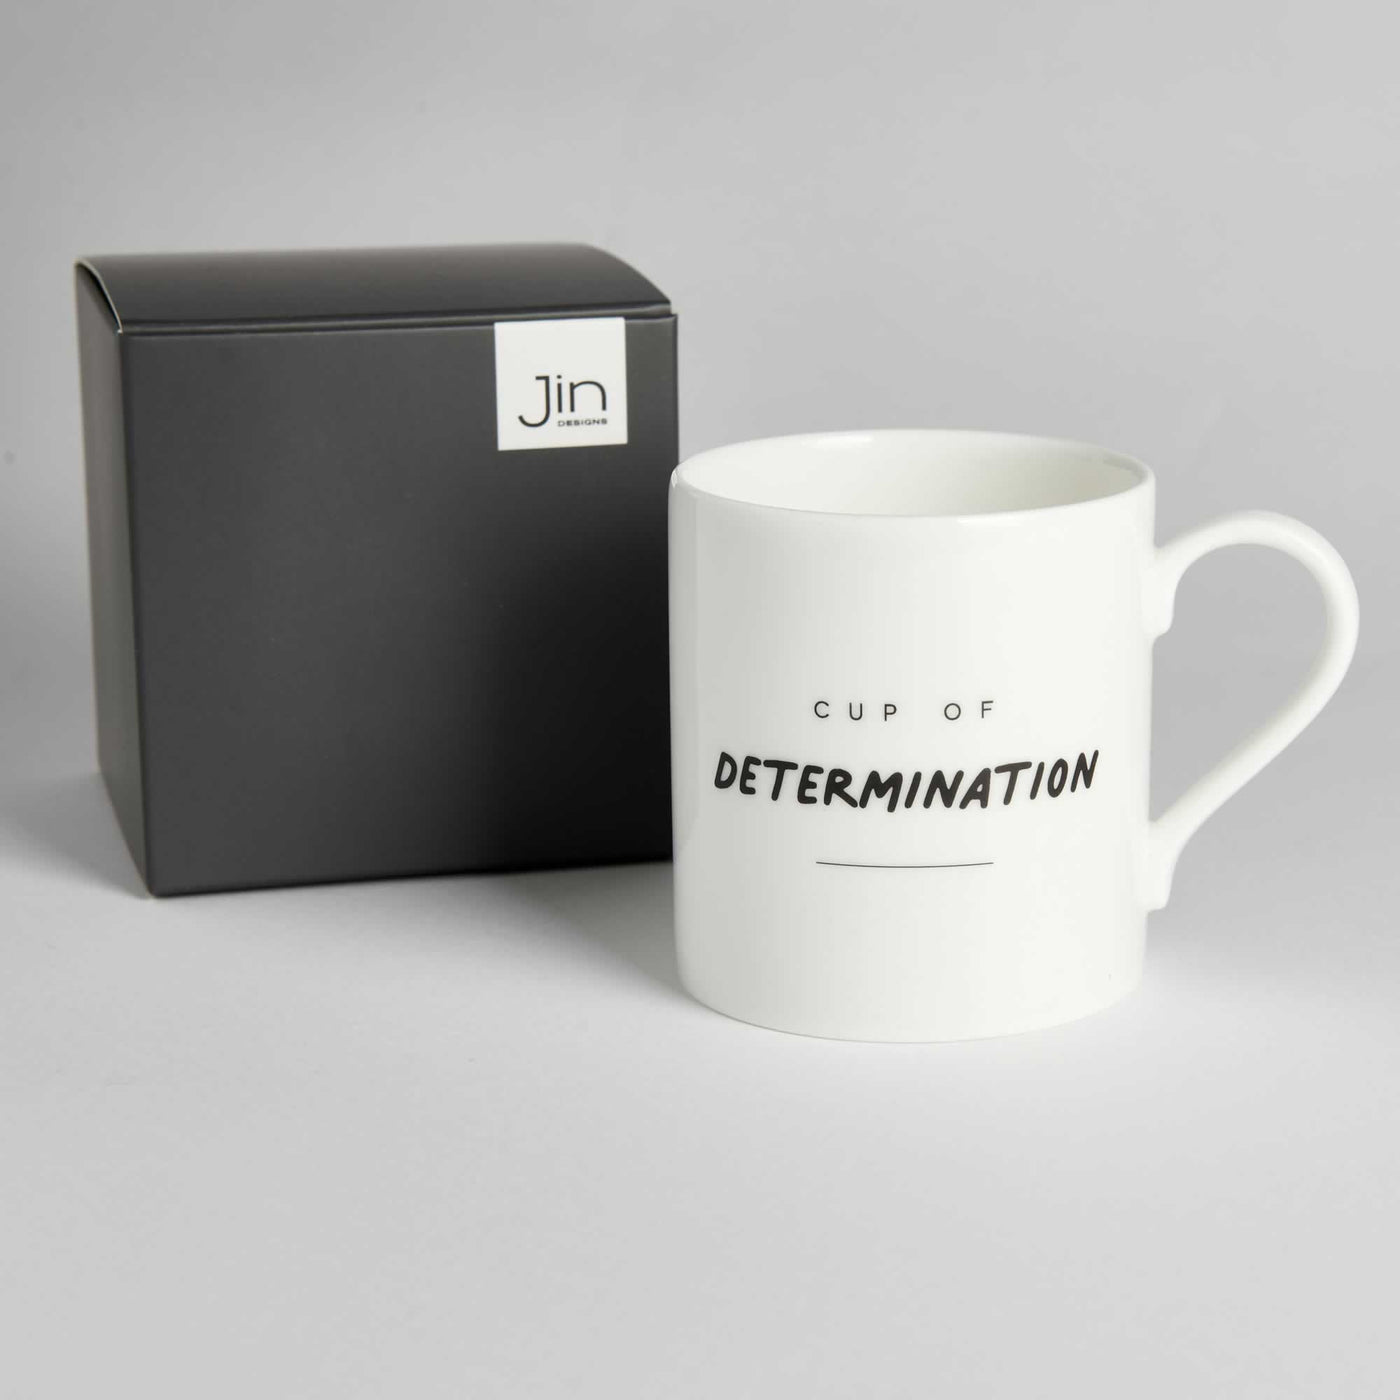 Cup of Determination Mug with gift box